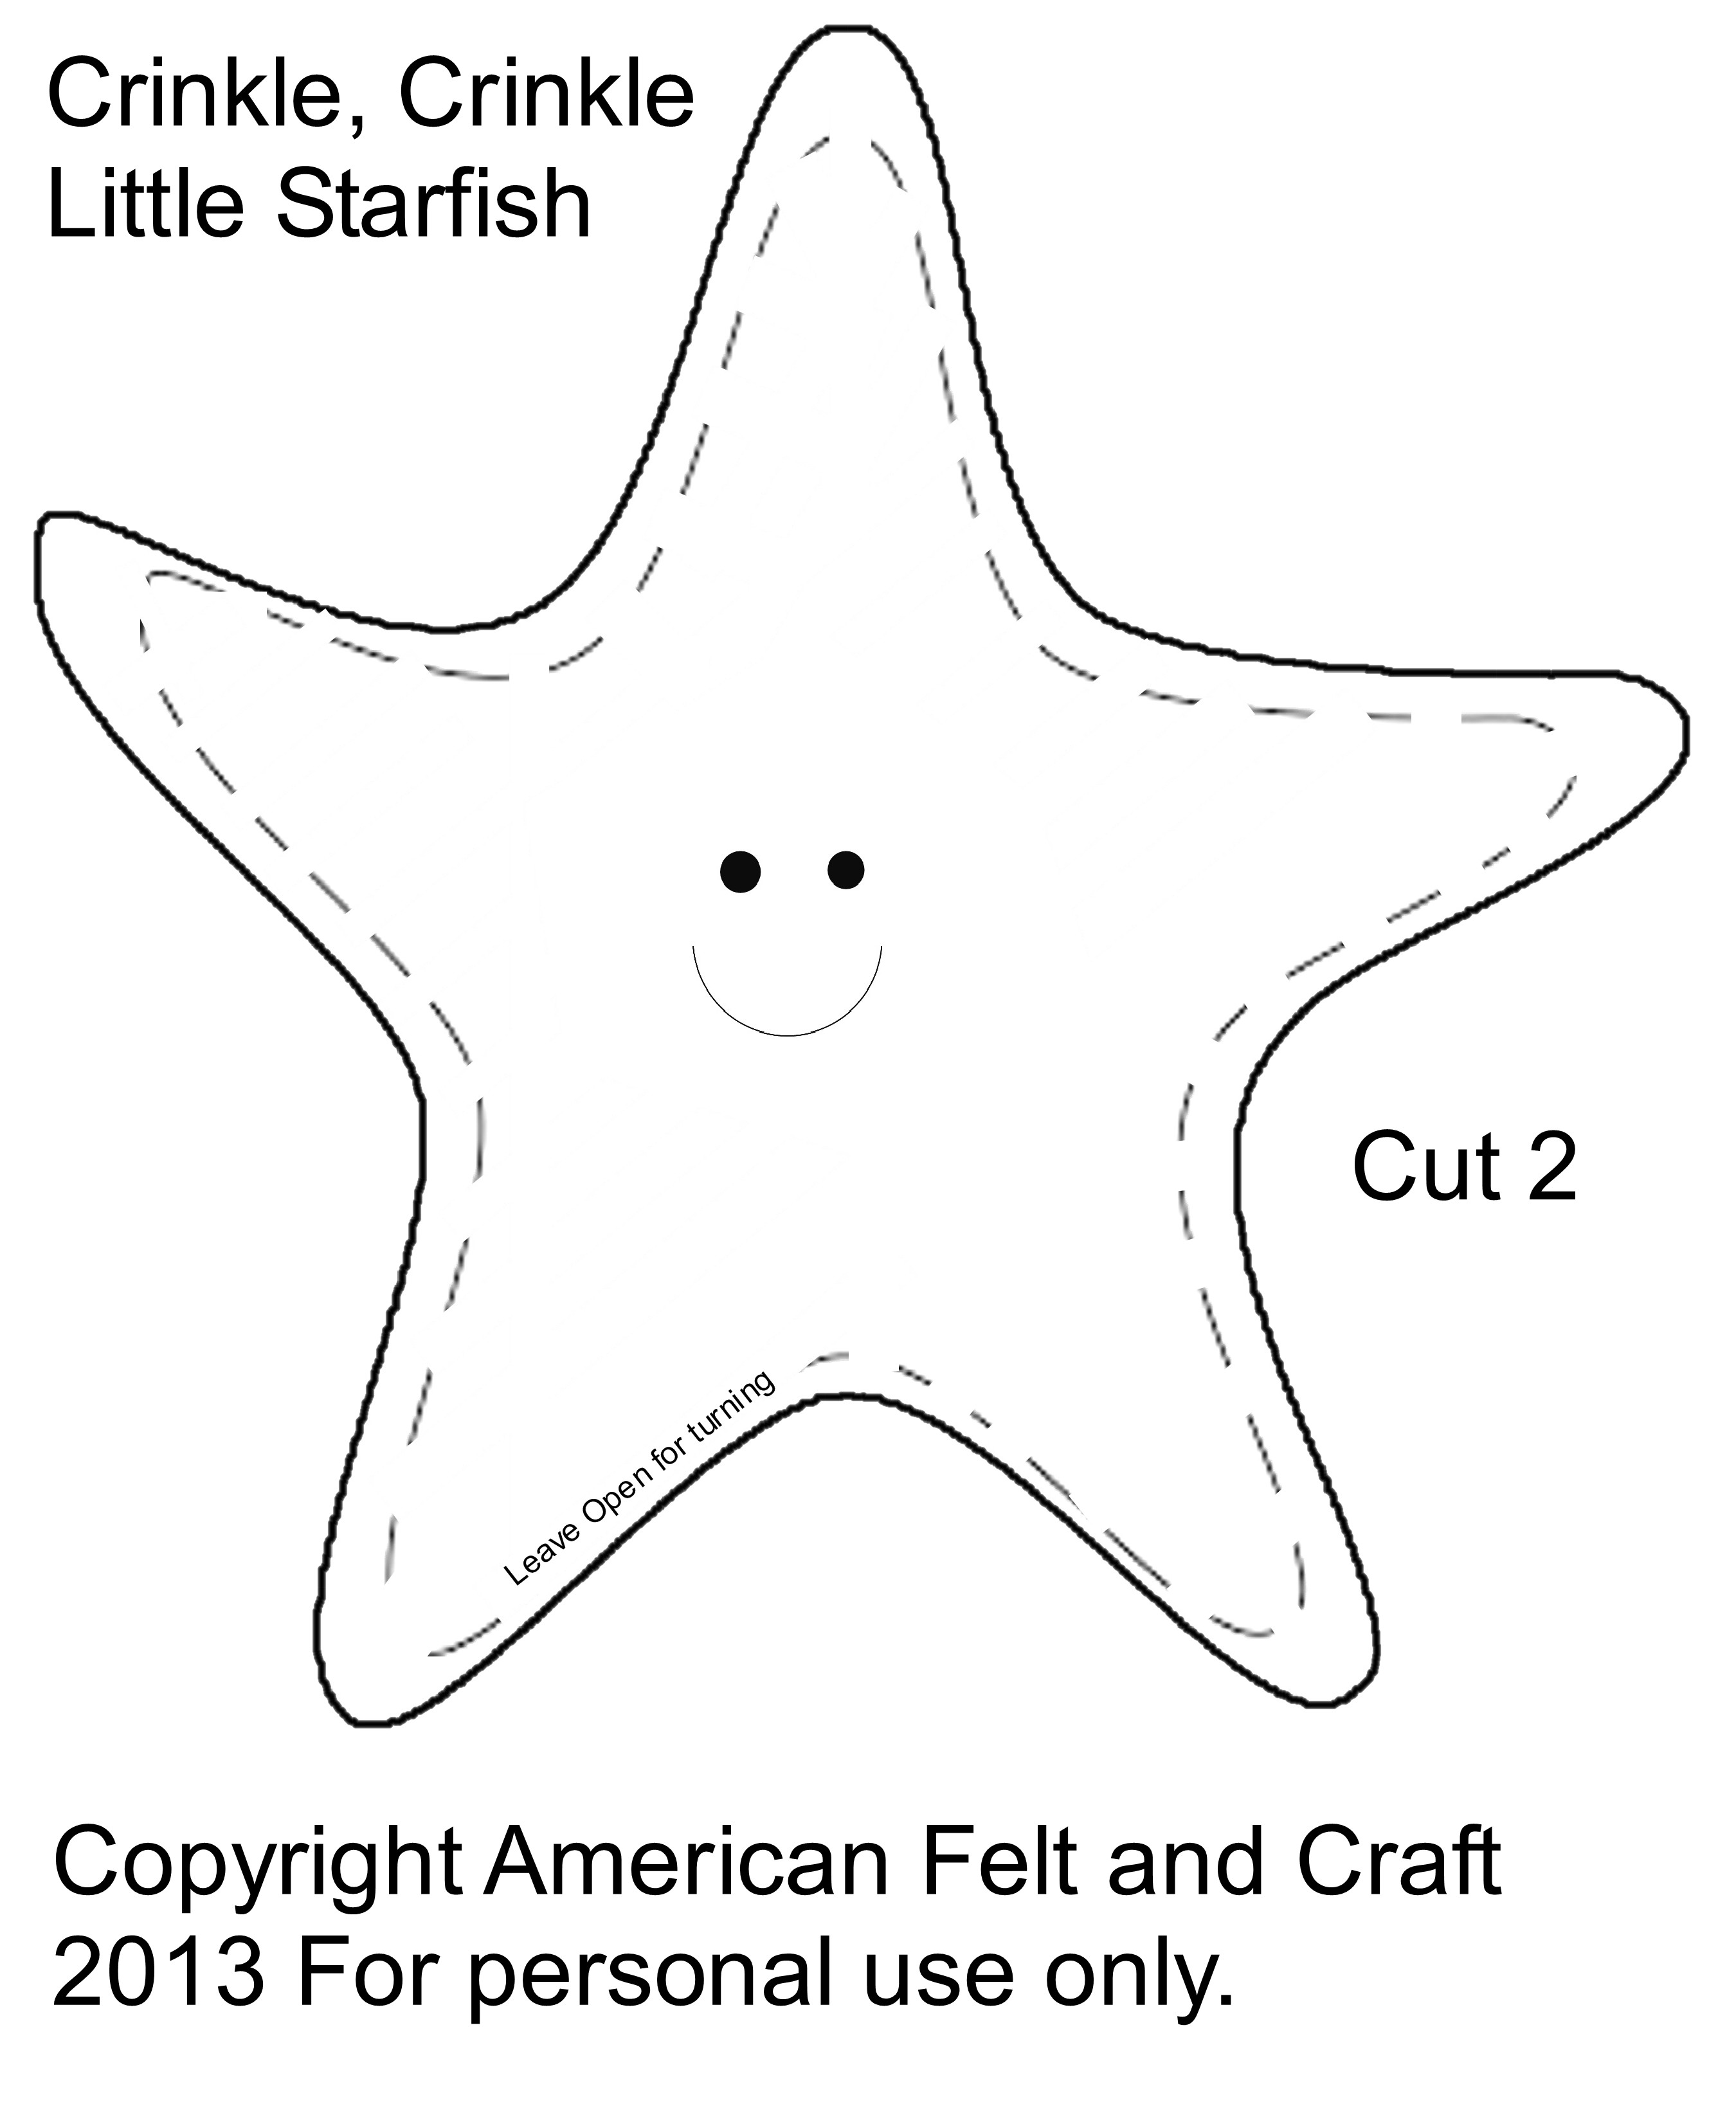 Free Starfish Template, Download Free Starfish Template png images